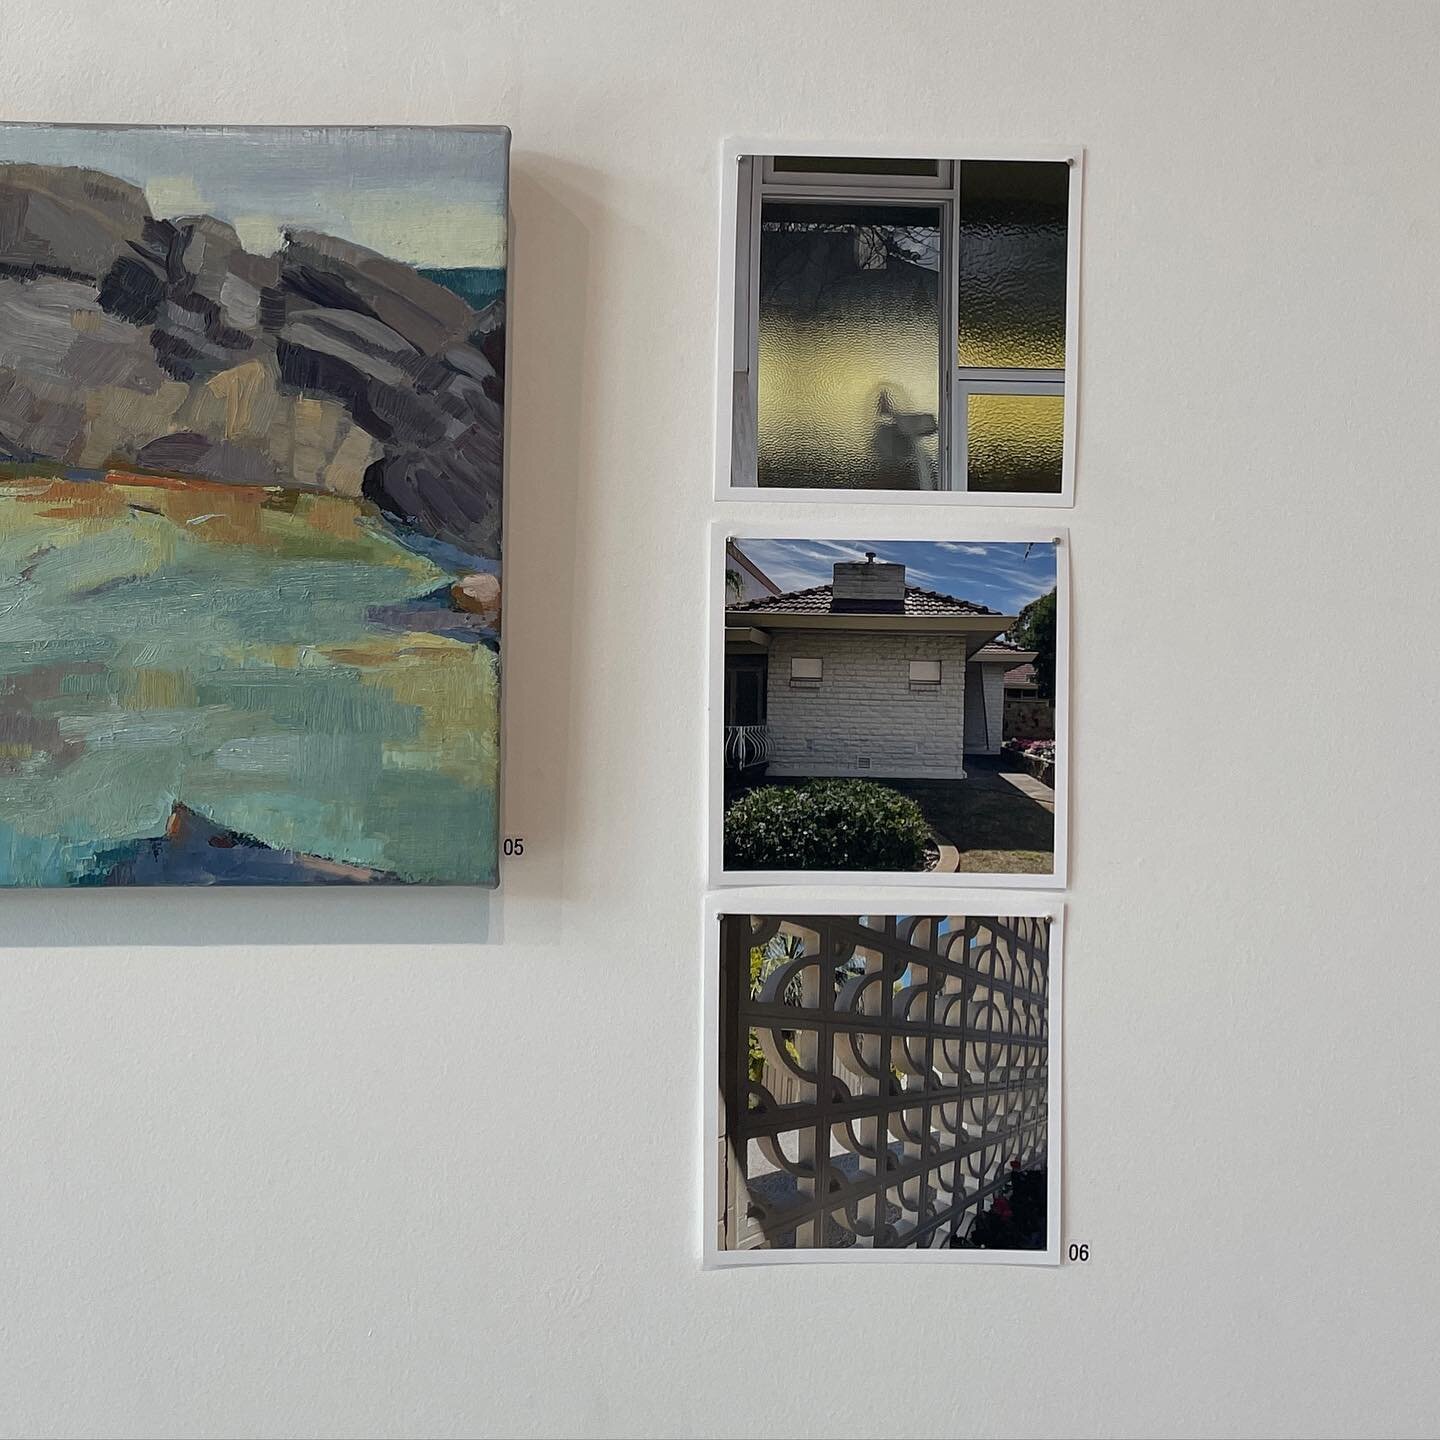 This is the last week of Observed X 2.  Ending May 7th.  A collaborative exhibition of the paintings of @cecilia_gunnarsson_  and photos of Anne Taylor (one half of Taylor Buchtmann Architecture). 
@newmarchgallery @cityofprospect. @anne_taylor_bucht